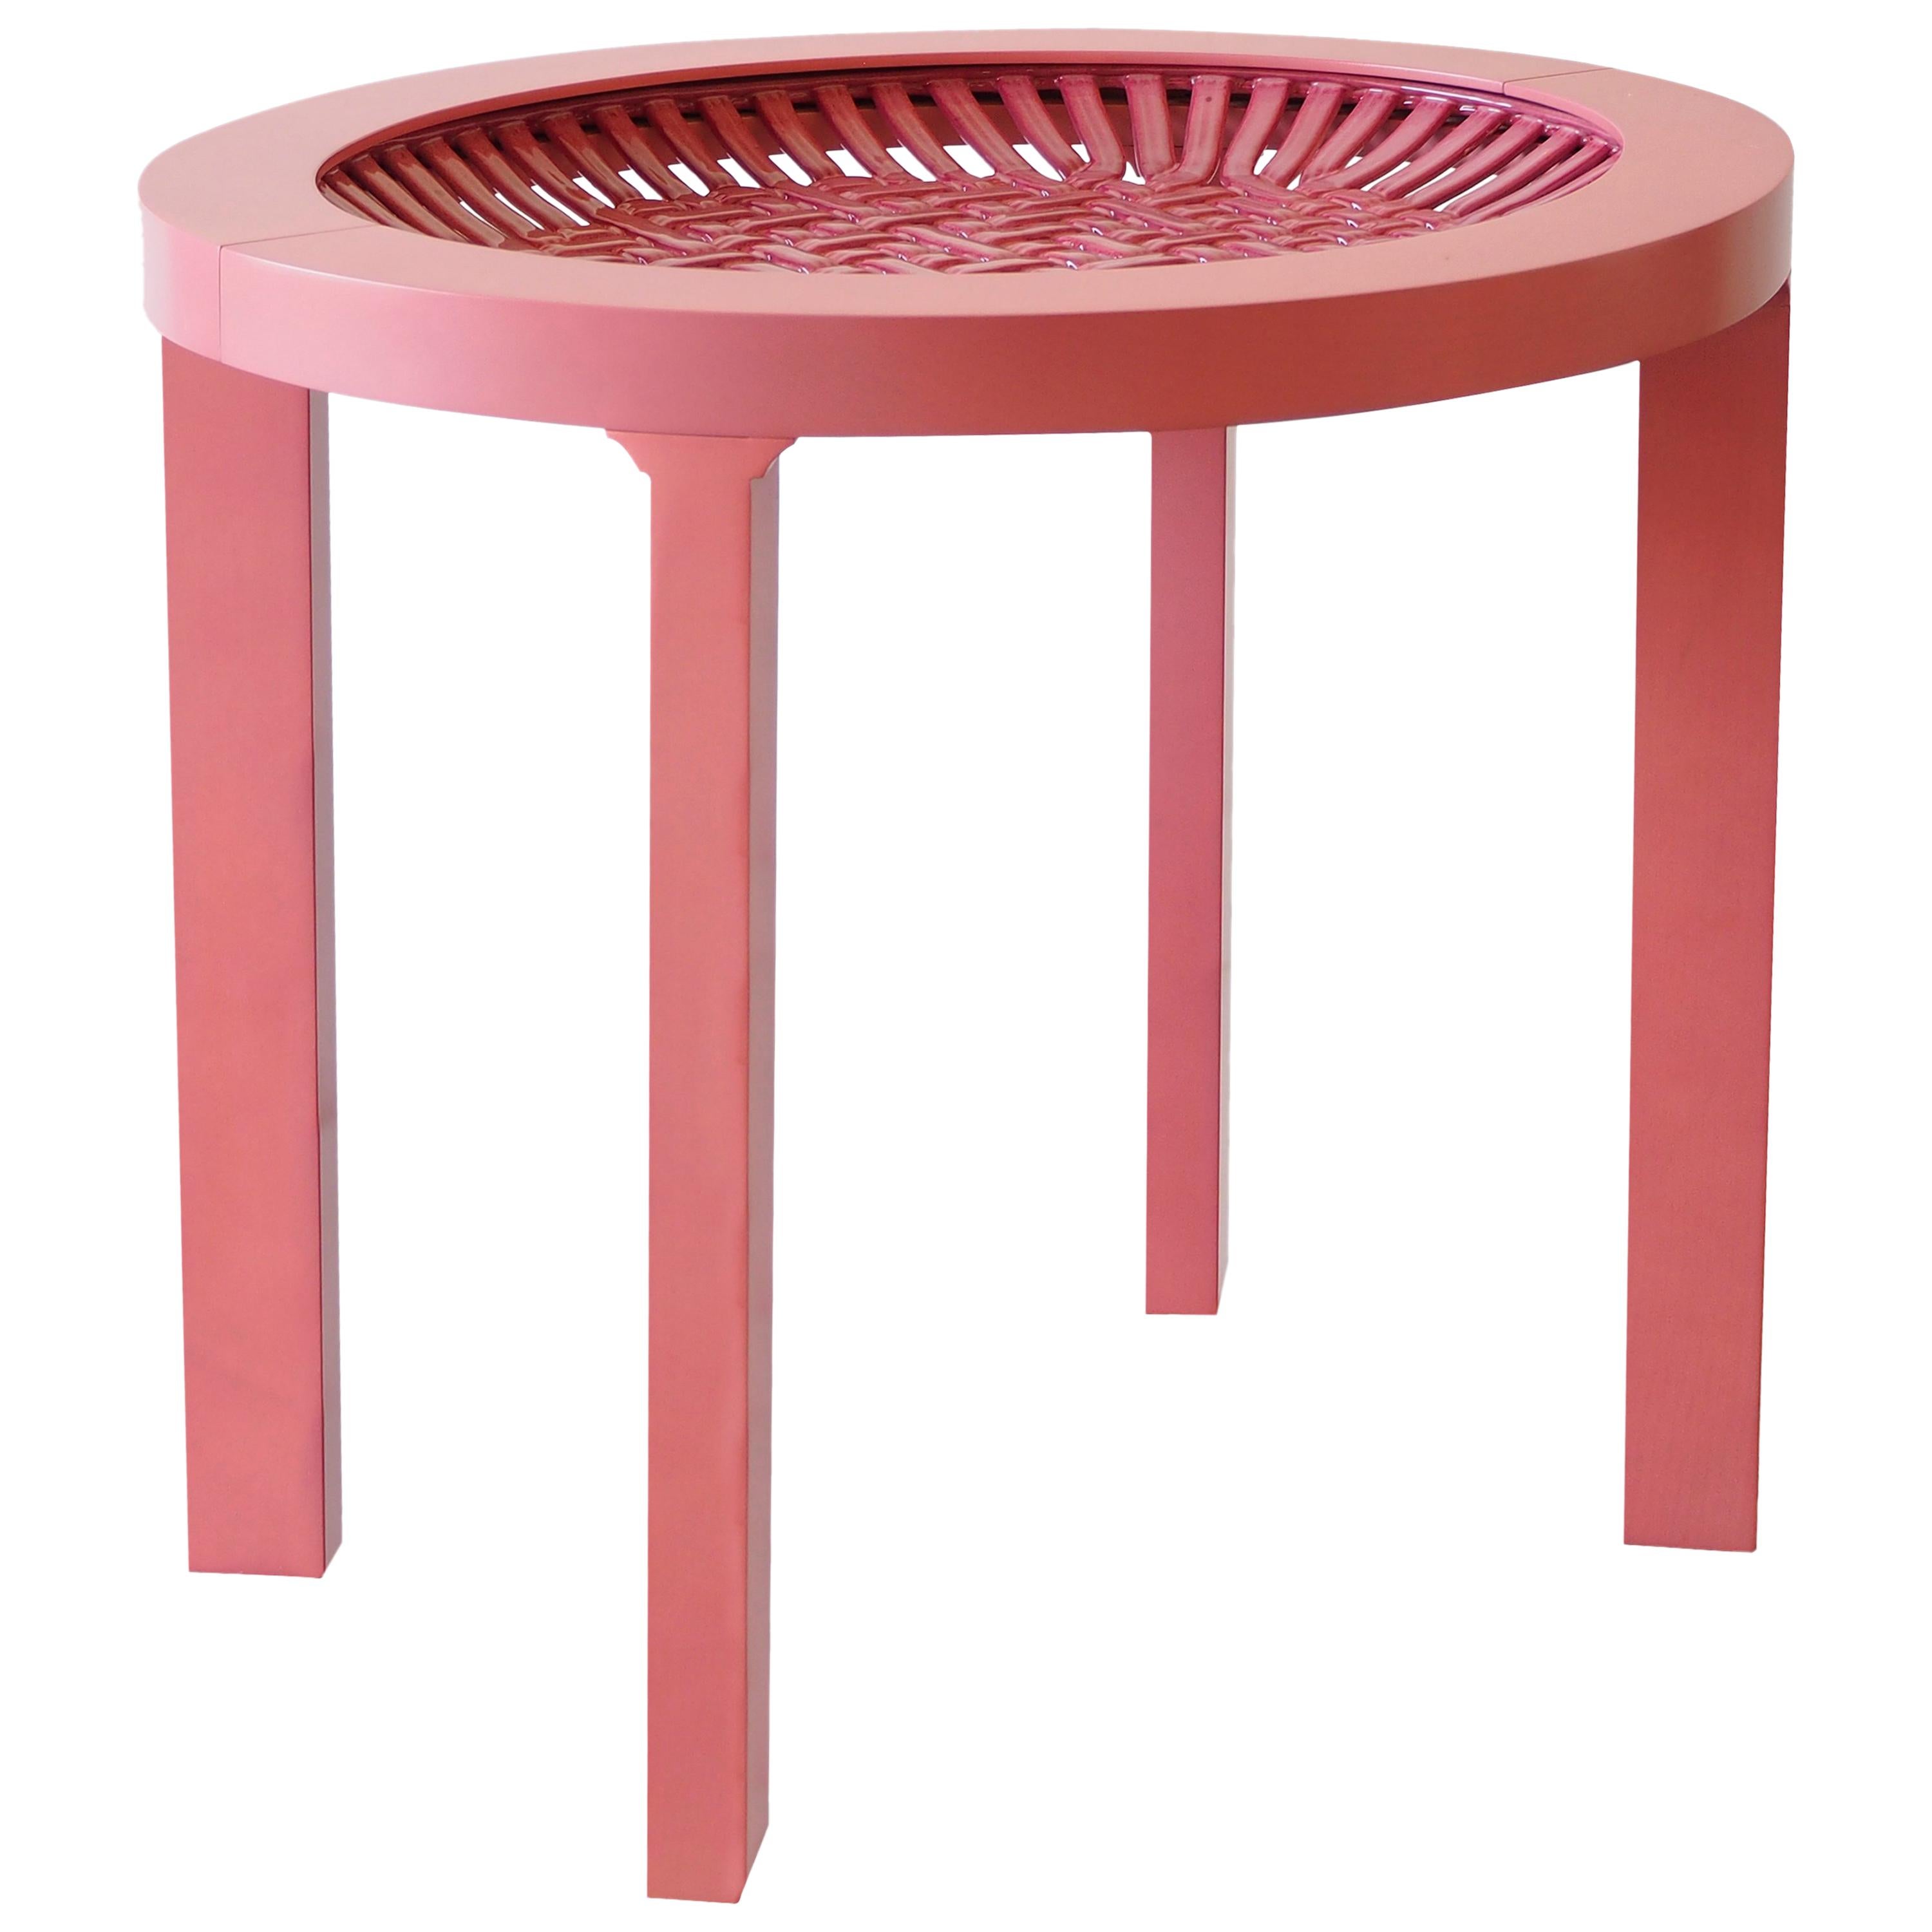 Ceramic and Maple Contemporary Pink Tea Table For Sale